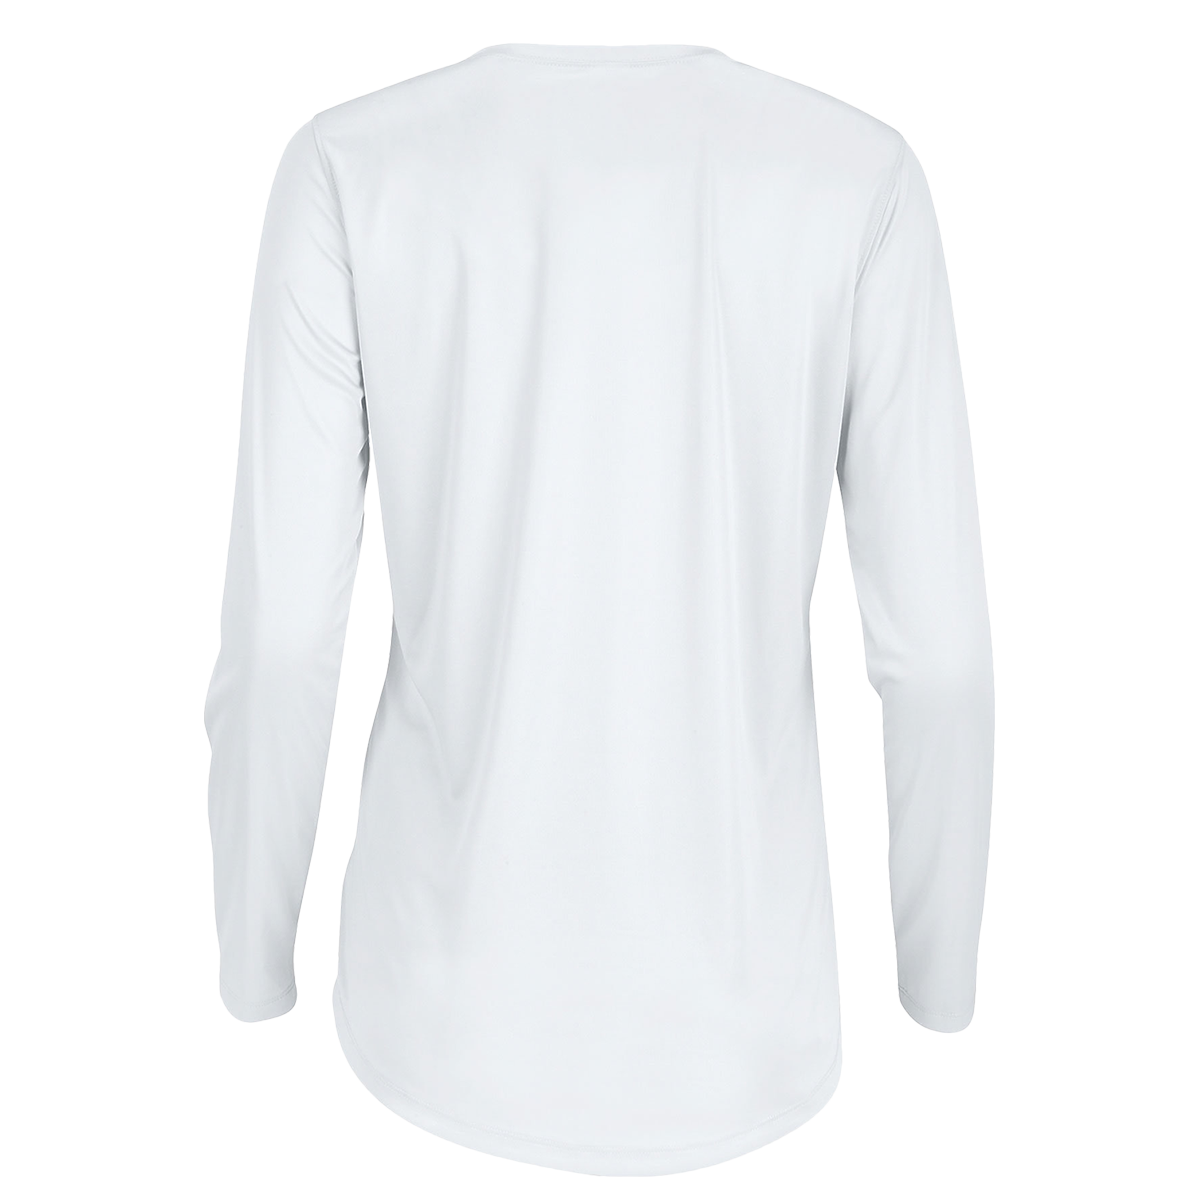 Phase Five Ladies Outline SPF Long Sleeve